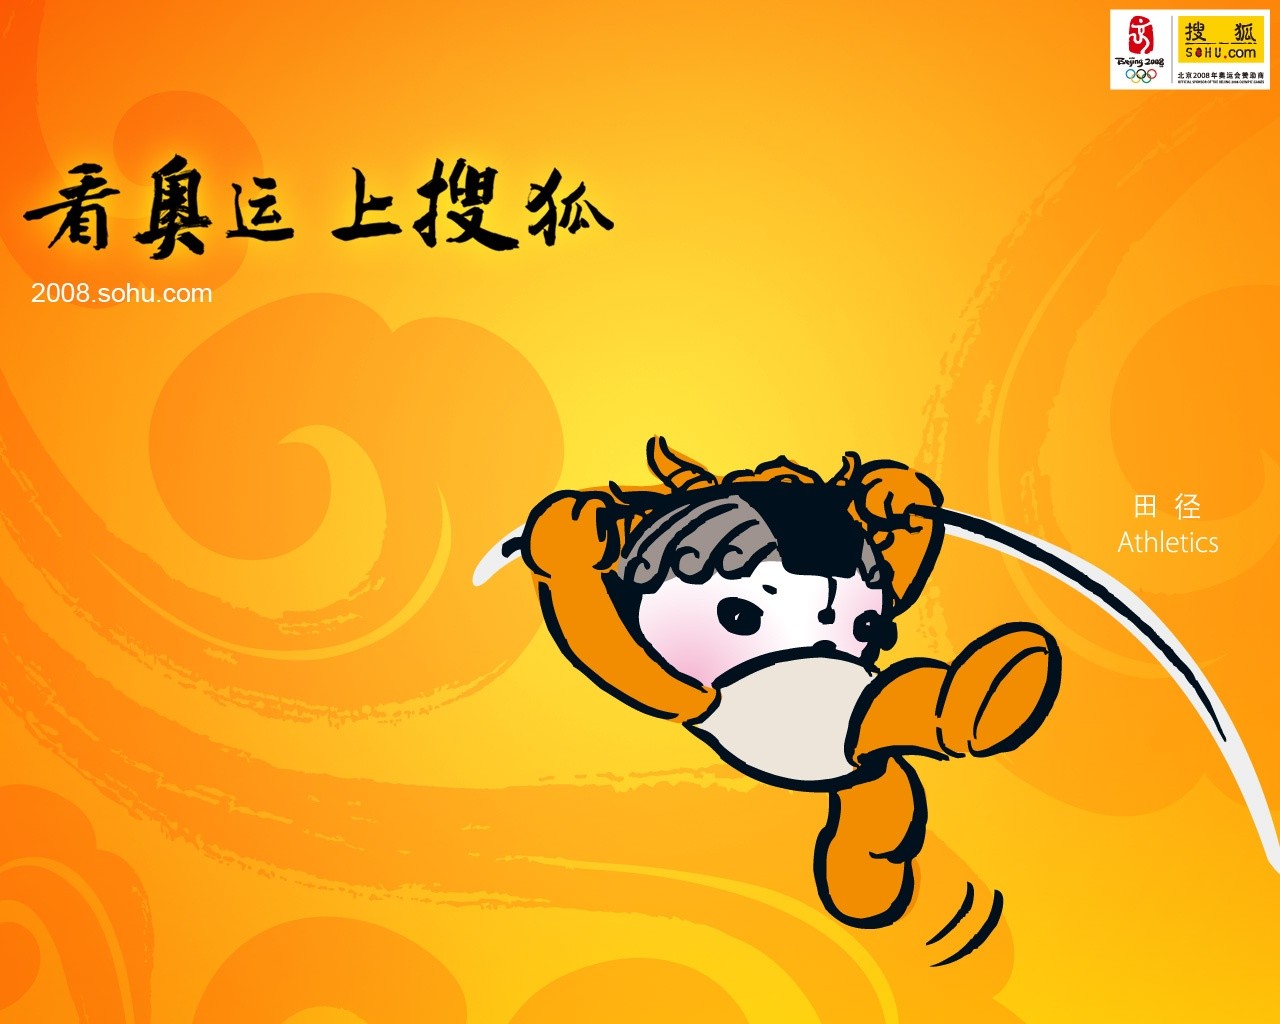 08 Olympic Games Fuwa Wallpapers #29 - 1280x1024